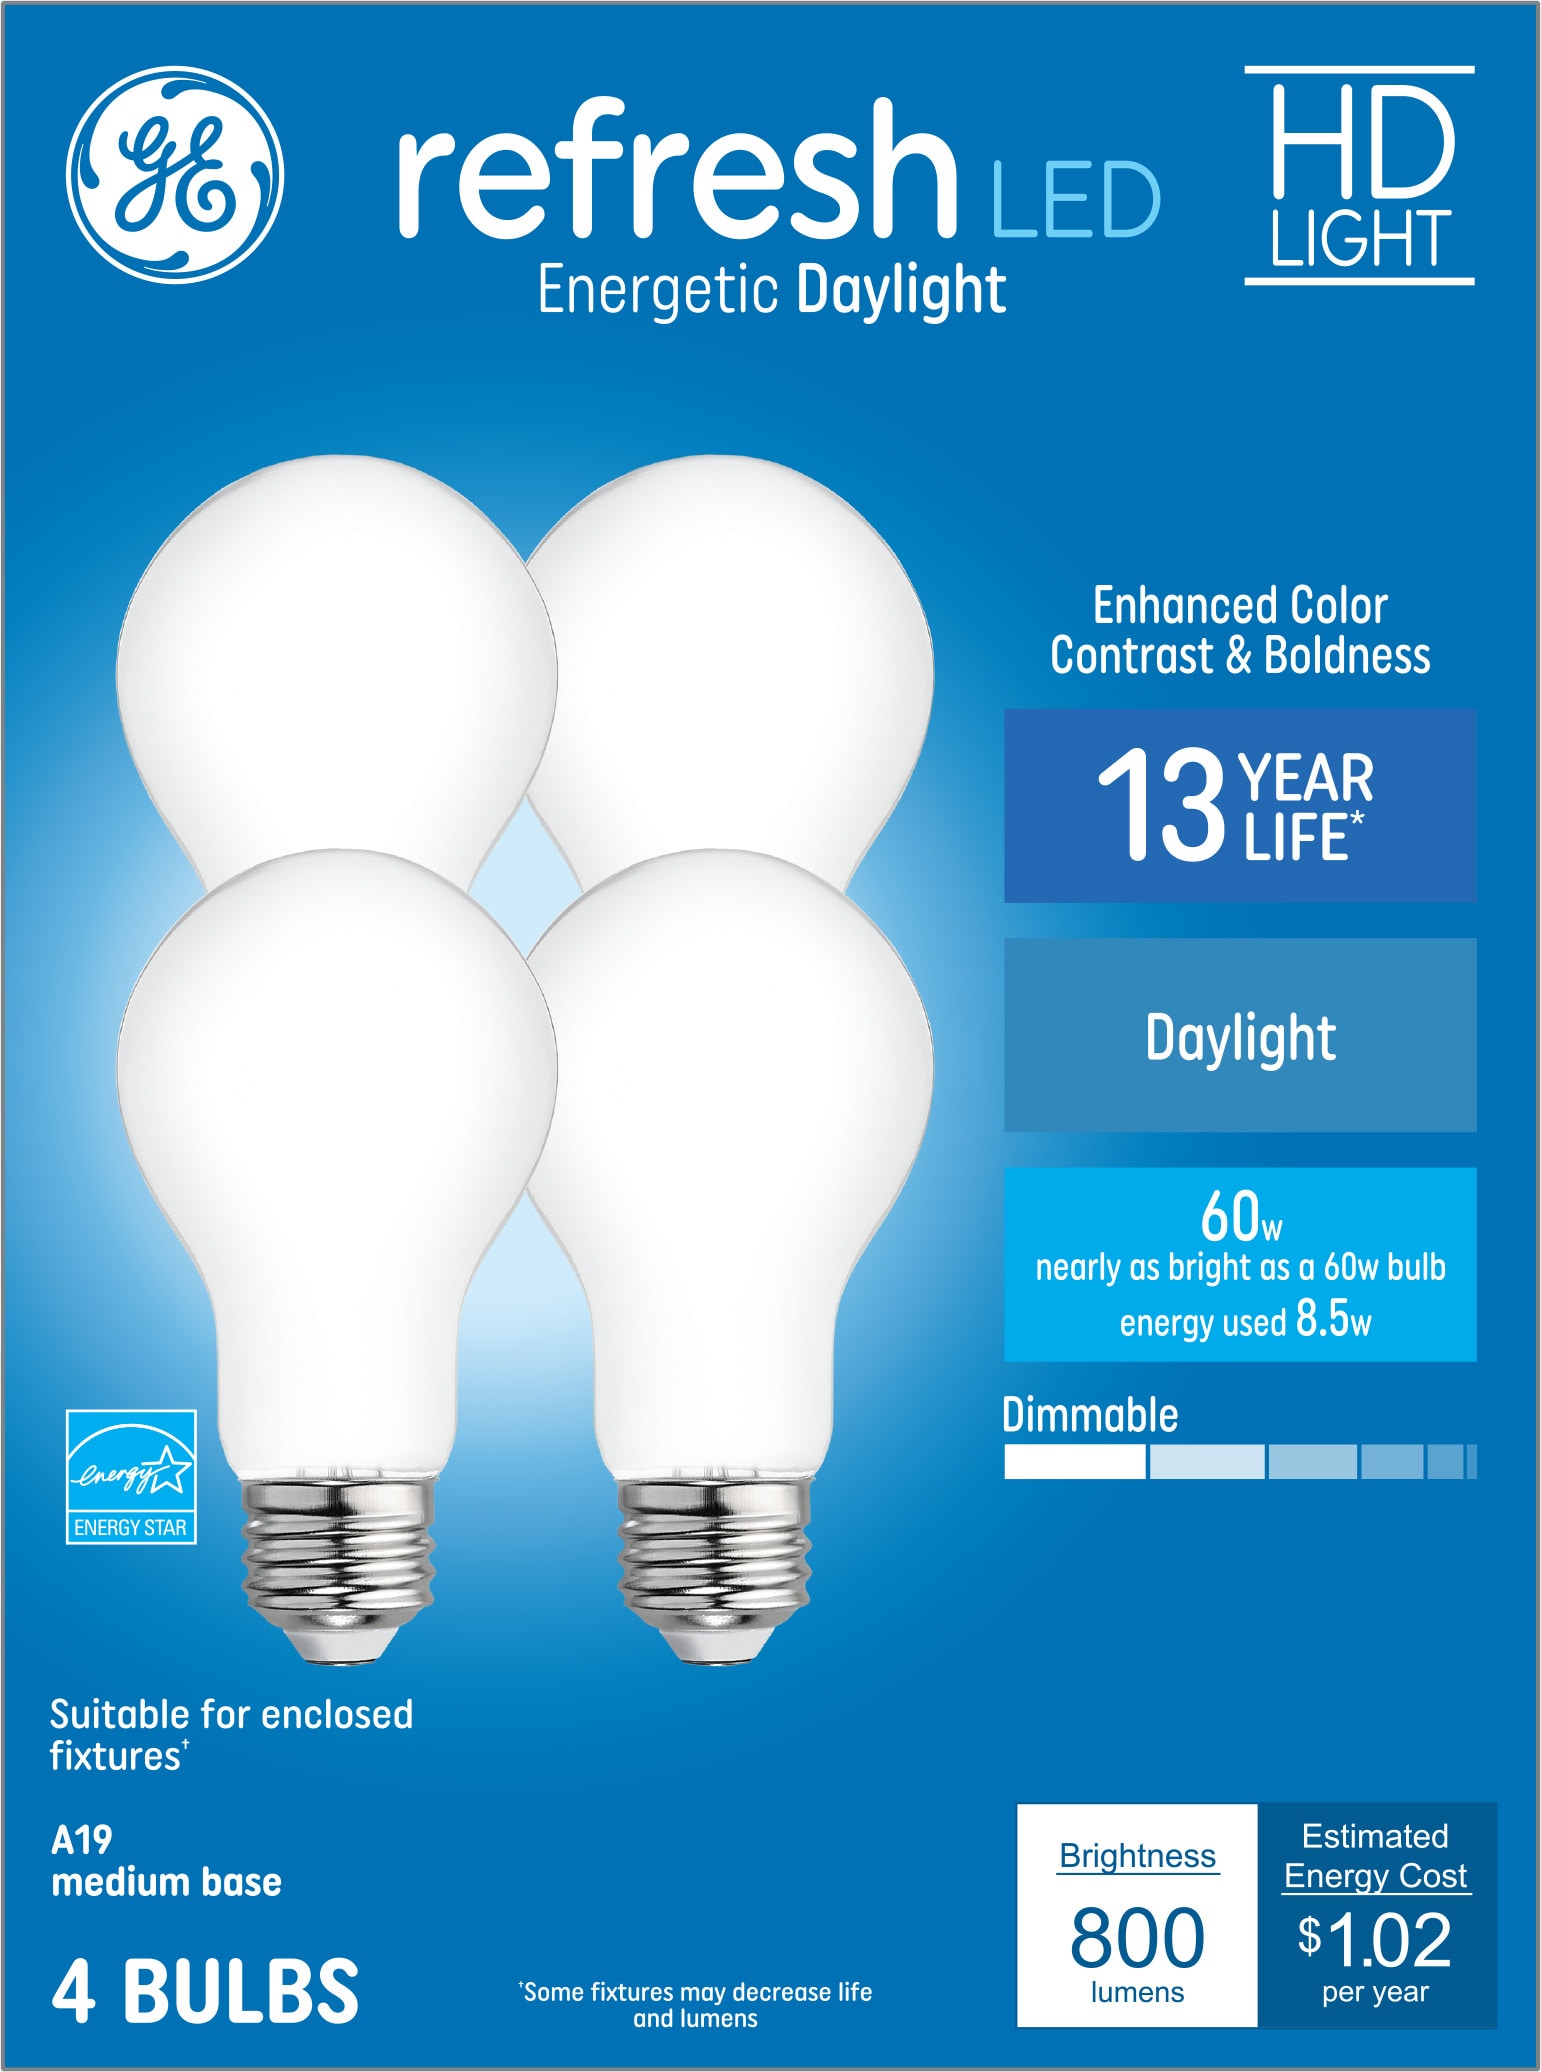 LUXRITE MR16 LED Bulb 50W Equivalent, 12V, 5000K Bright White Dimmable, 500  Lumens, GU5.3 LED Spotlight Bulb 6.5W, Enclosed Fixture Rated, Perfect for